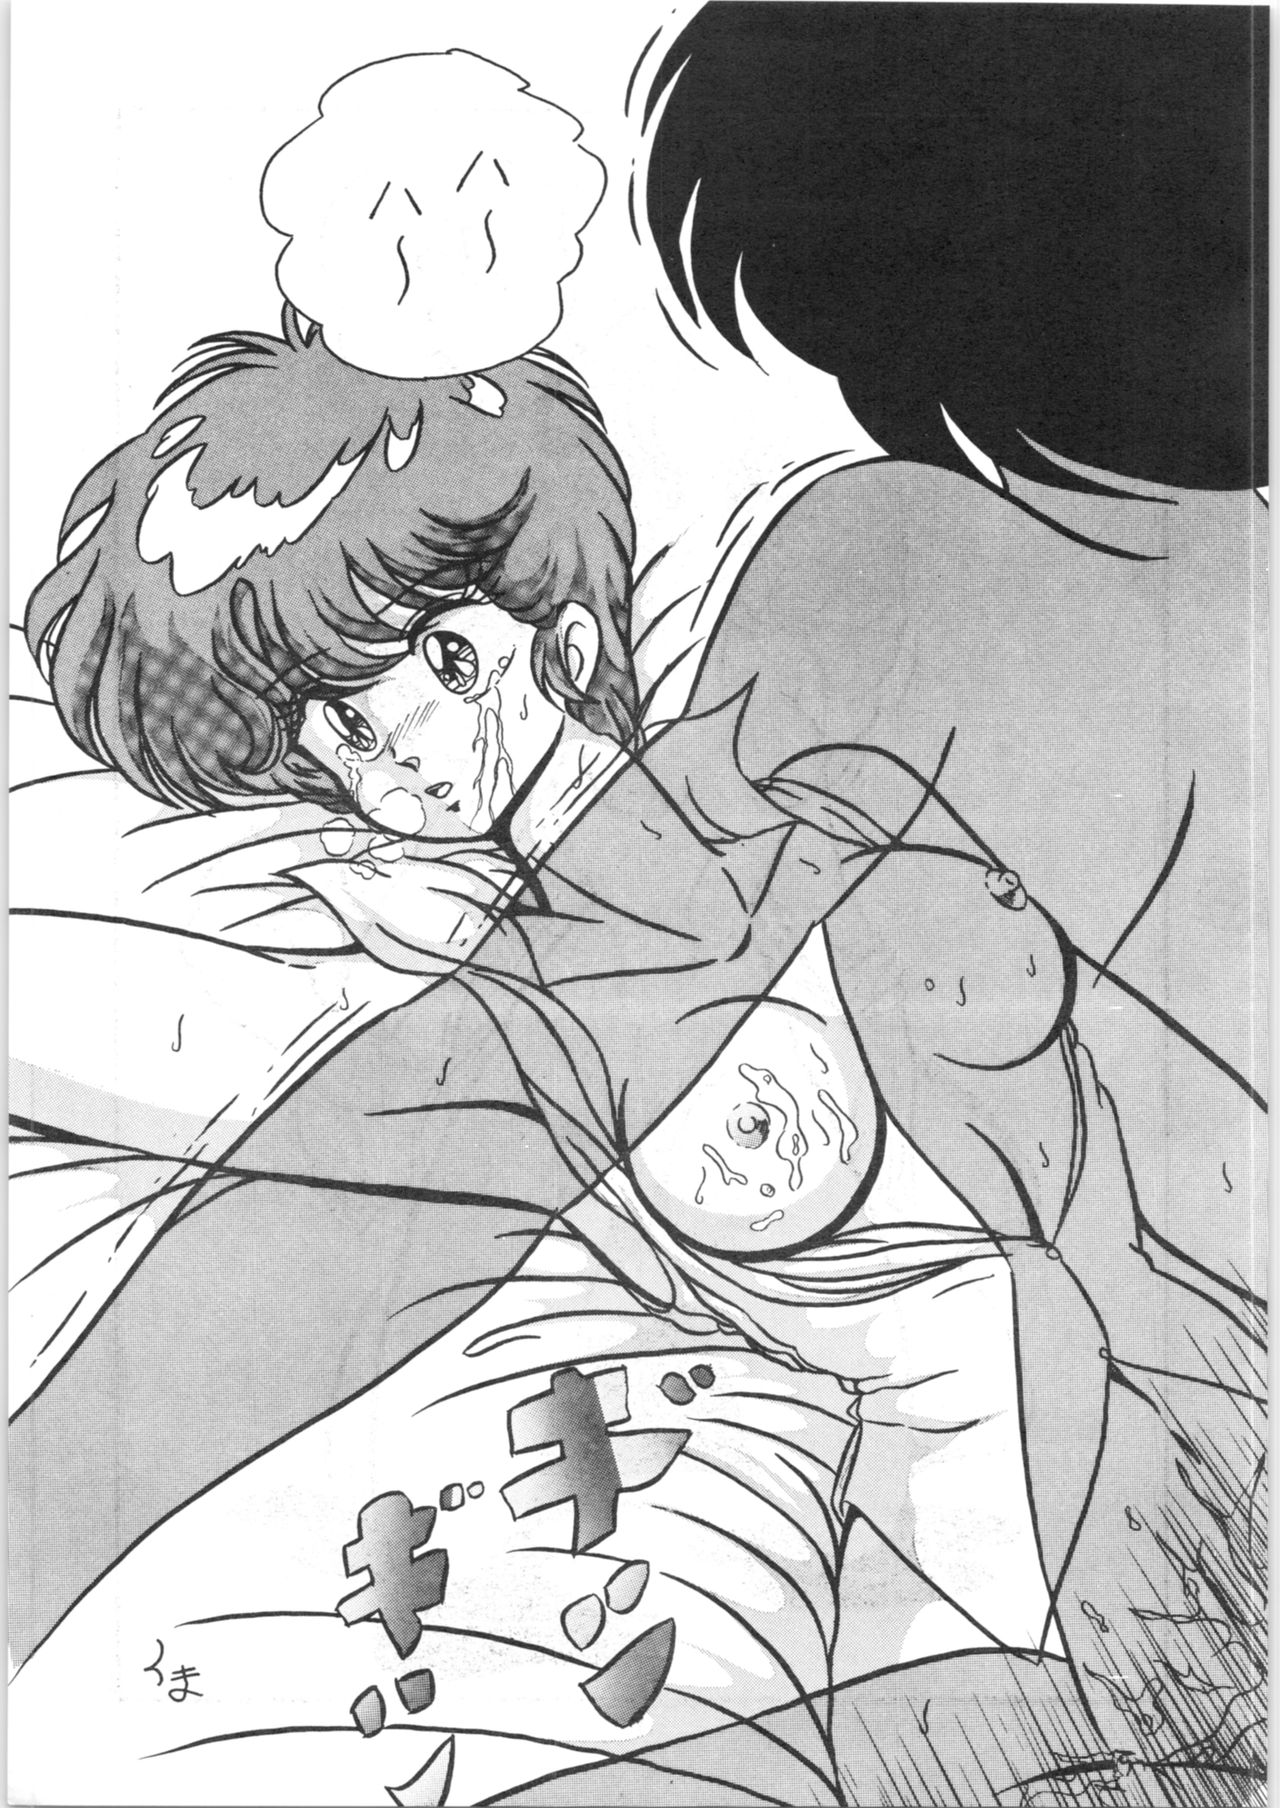 [C-COMPANY] C-COMPANY SPECIAL STAGE 2 (Ranma 1/2) page 4 full